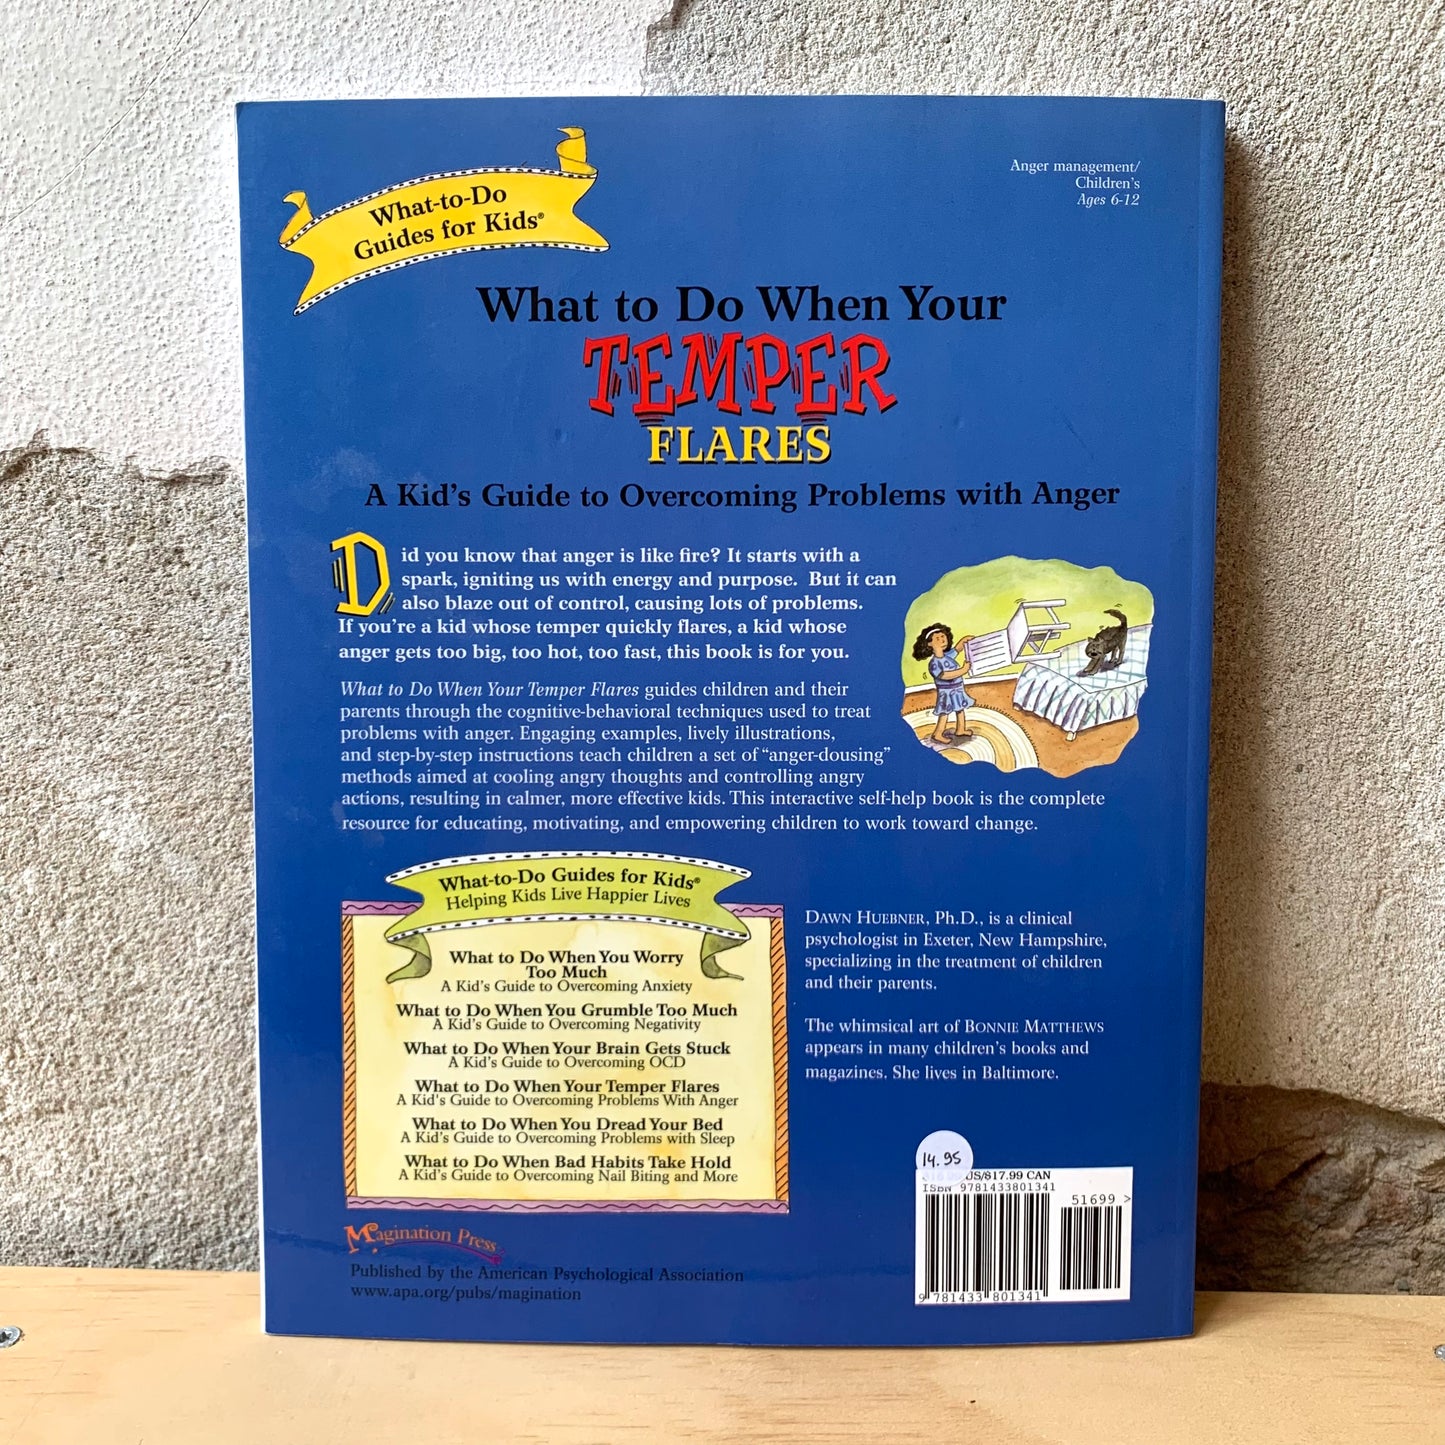 What to Do When Your Temper Flares: A Kid's Guide to Overcoming Problems with Anger – Dawn Huebner